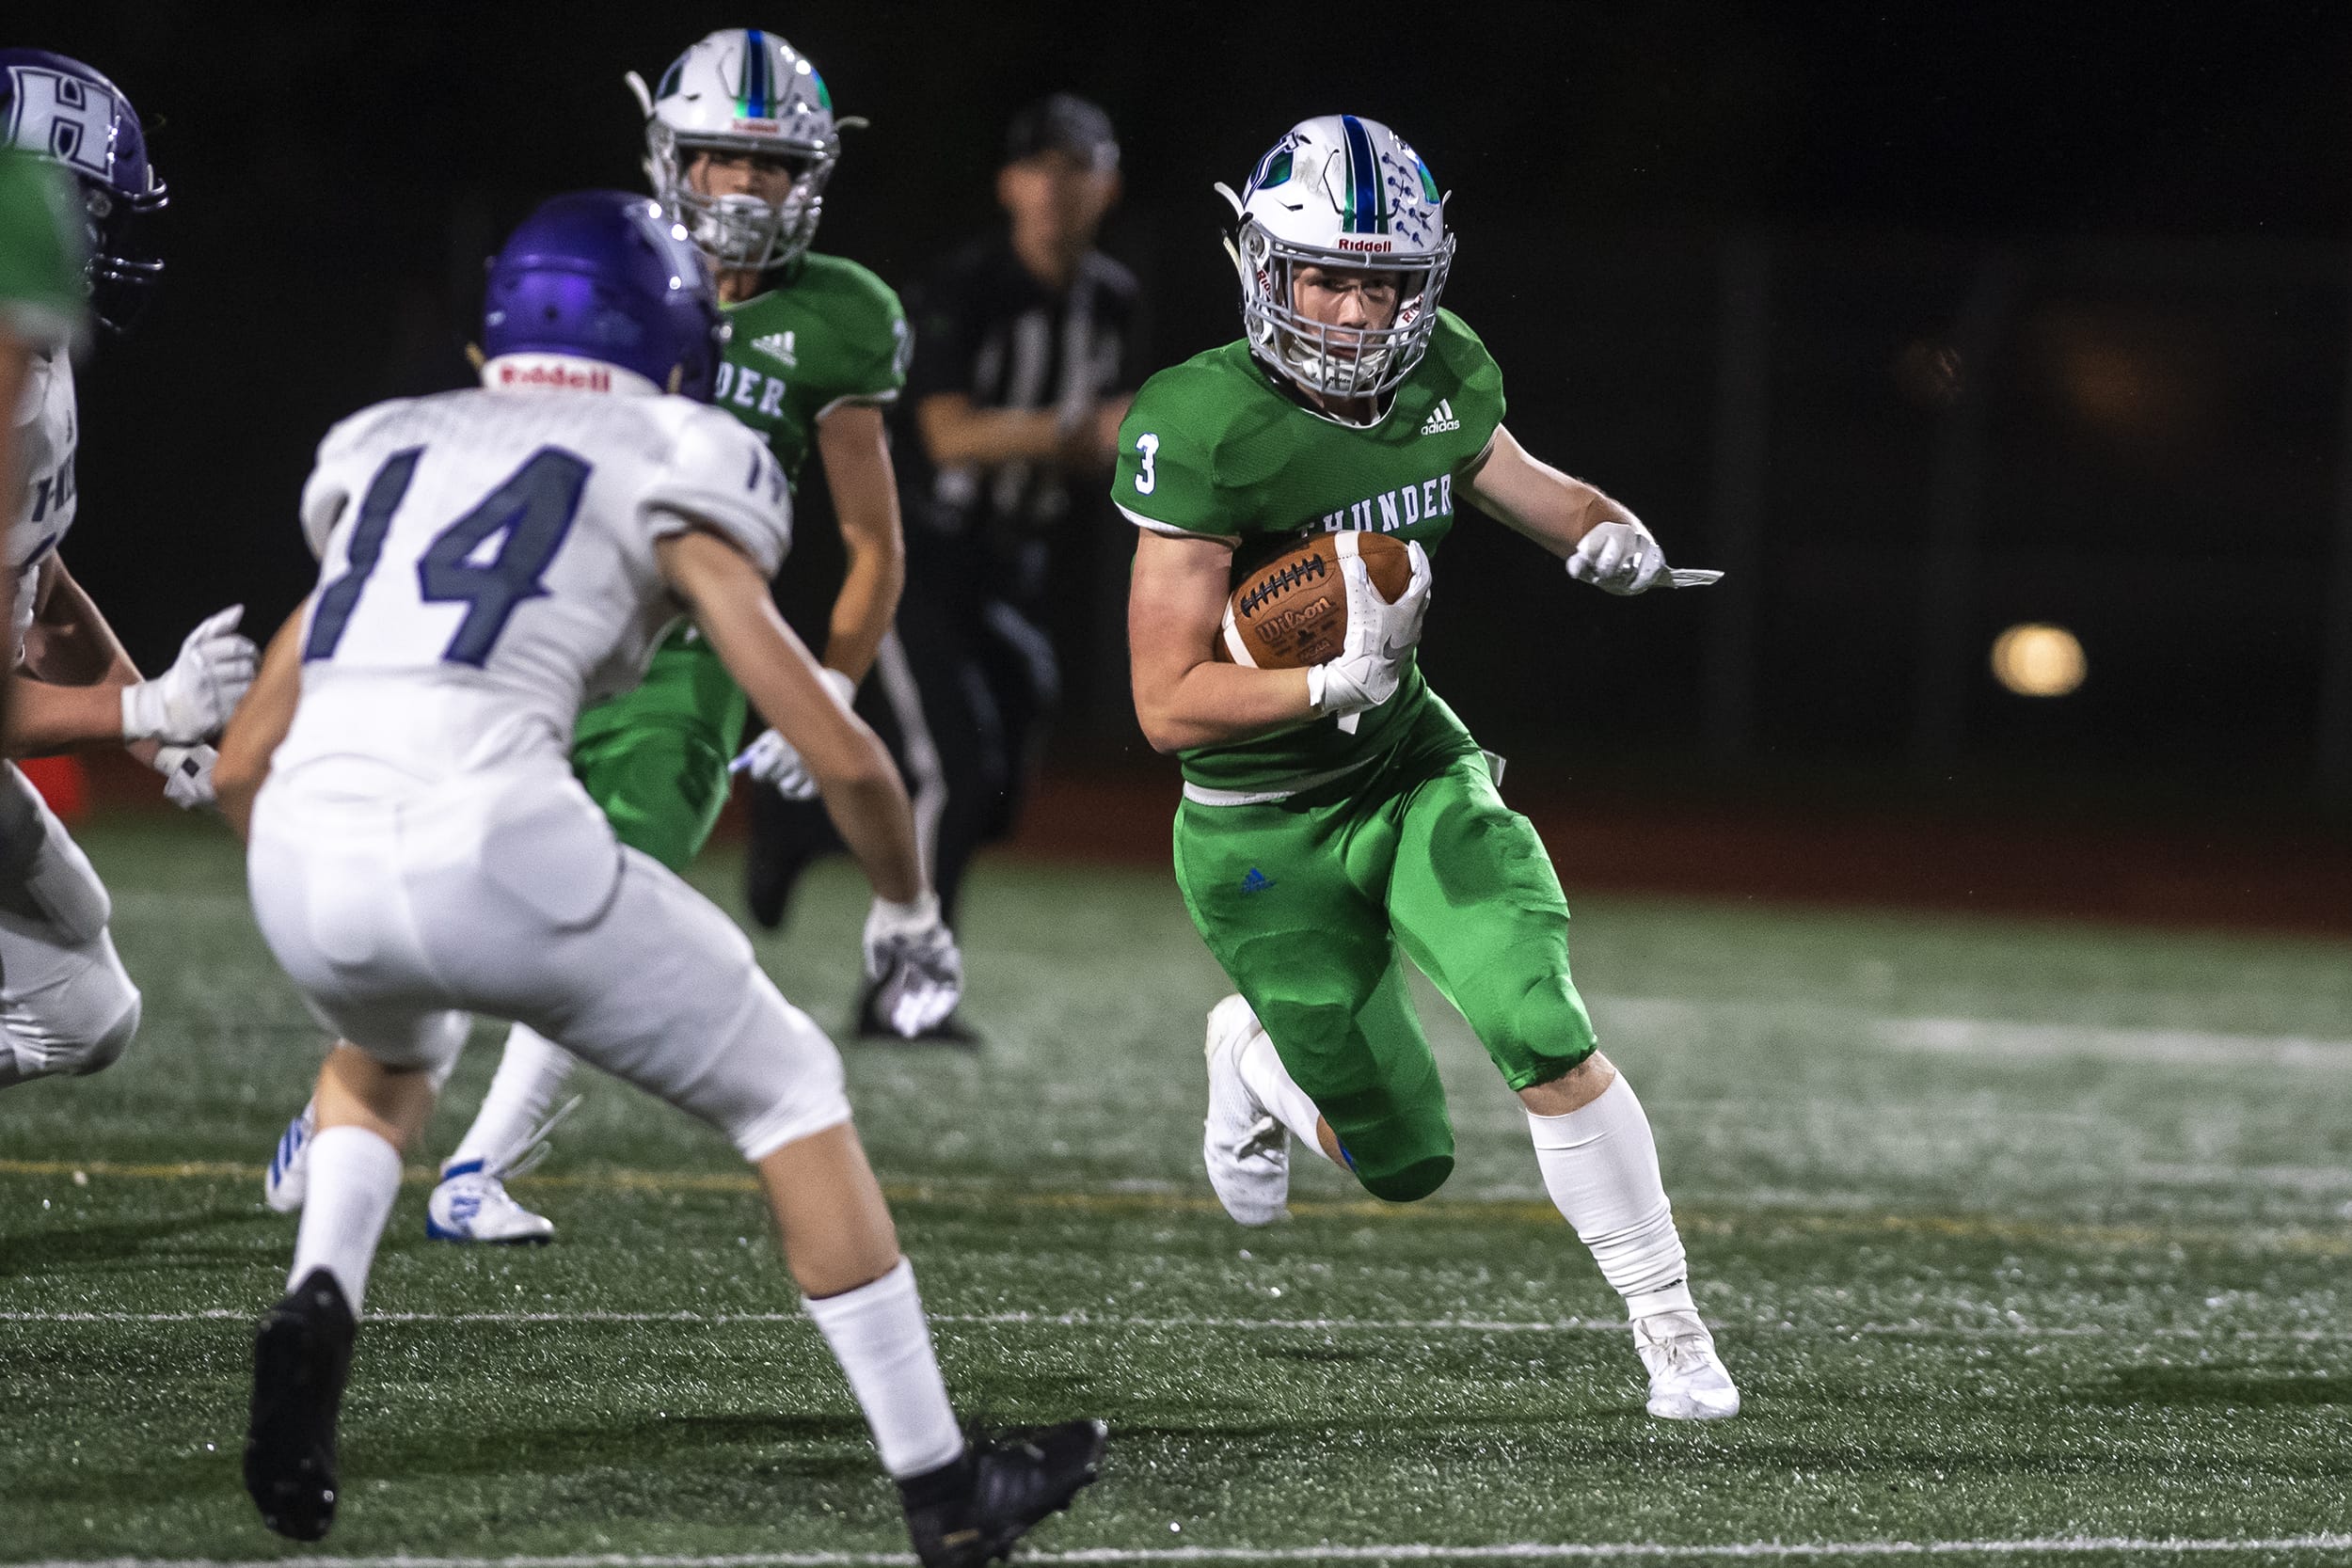 Mountain View’s Alec Cann runs the ball against Heritage during a game at McKenzie Stadium on Friday night, Sept 27, 2019.